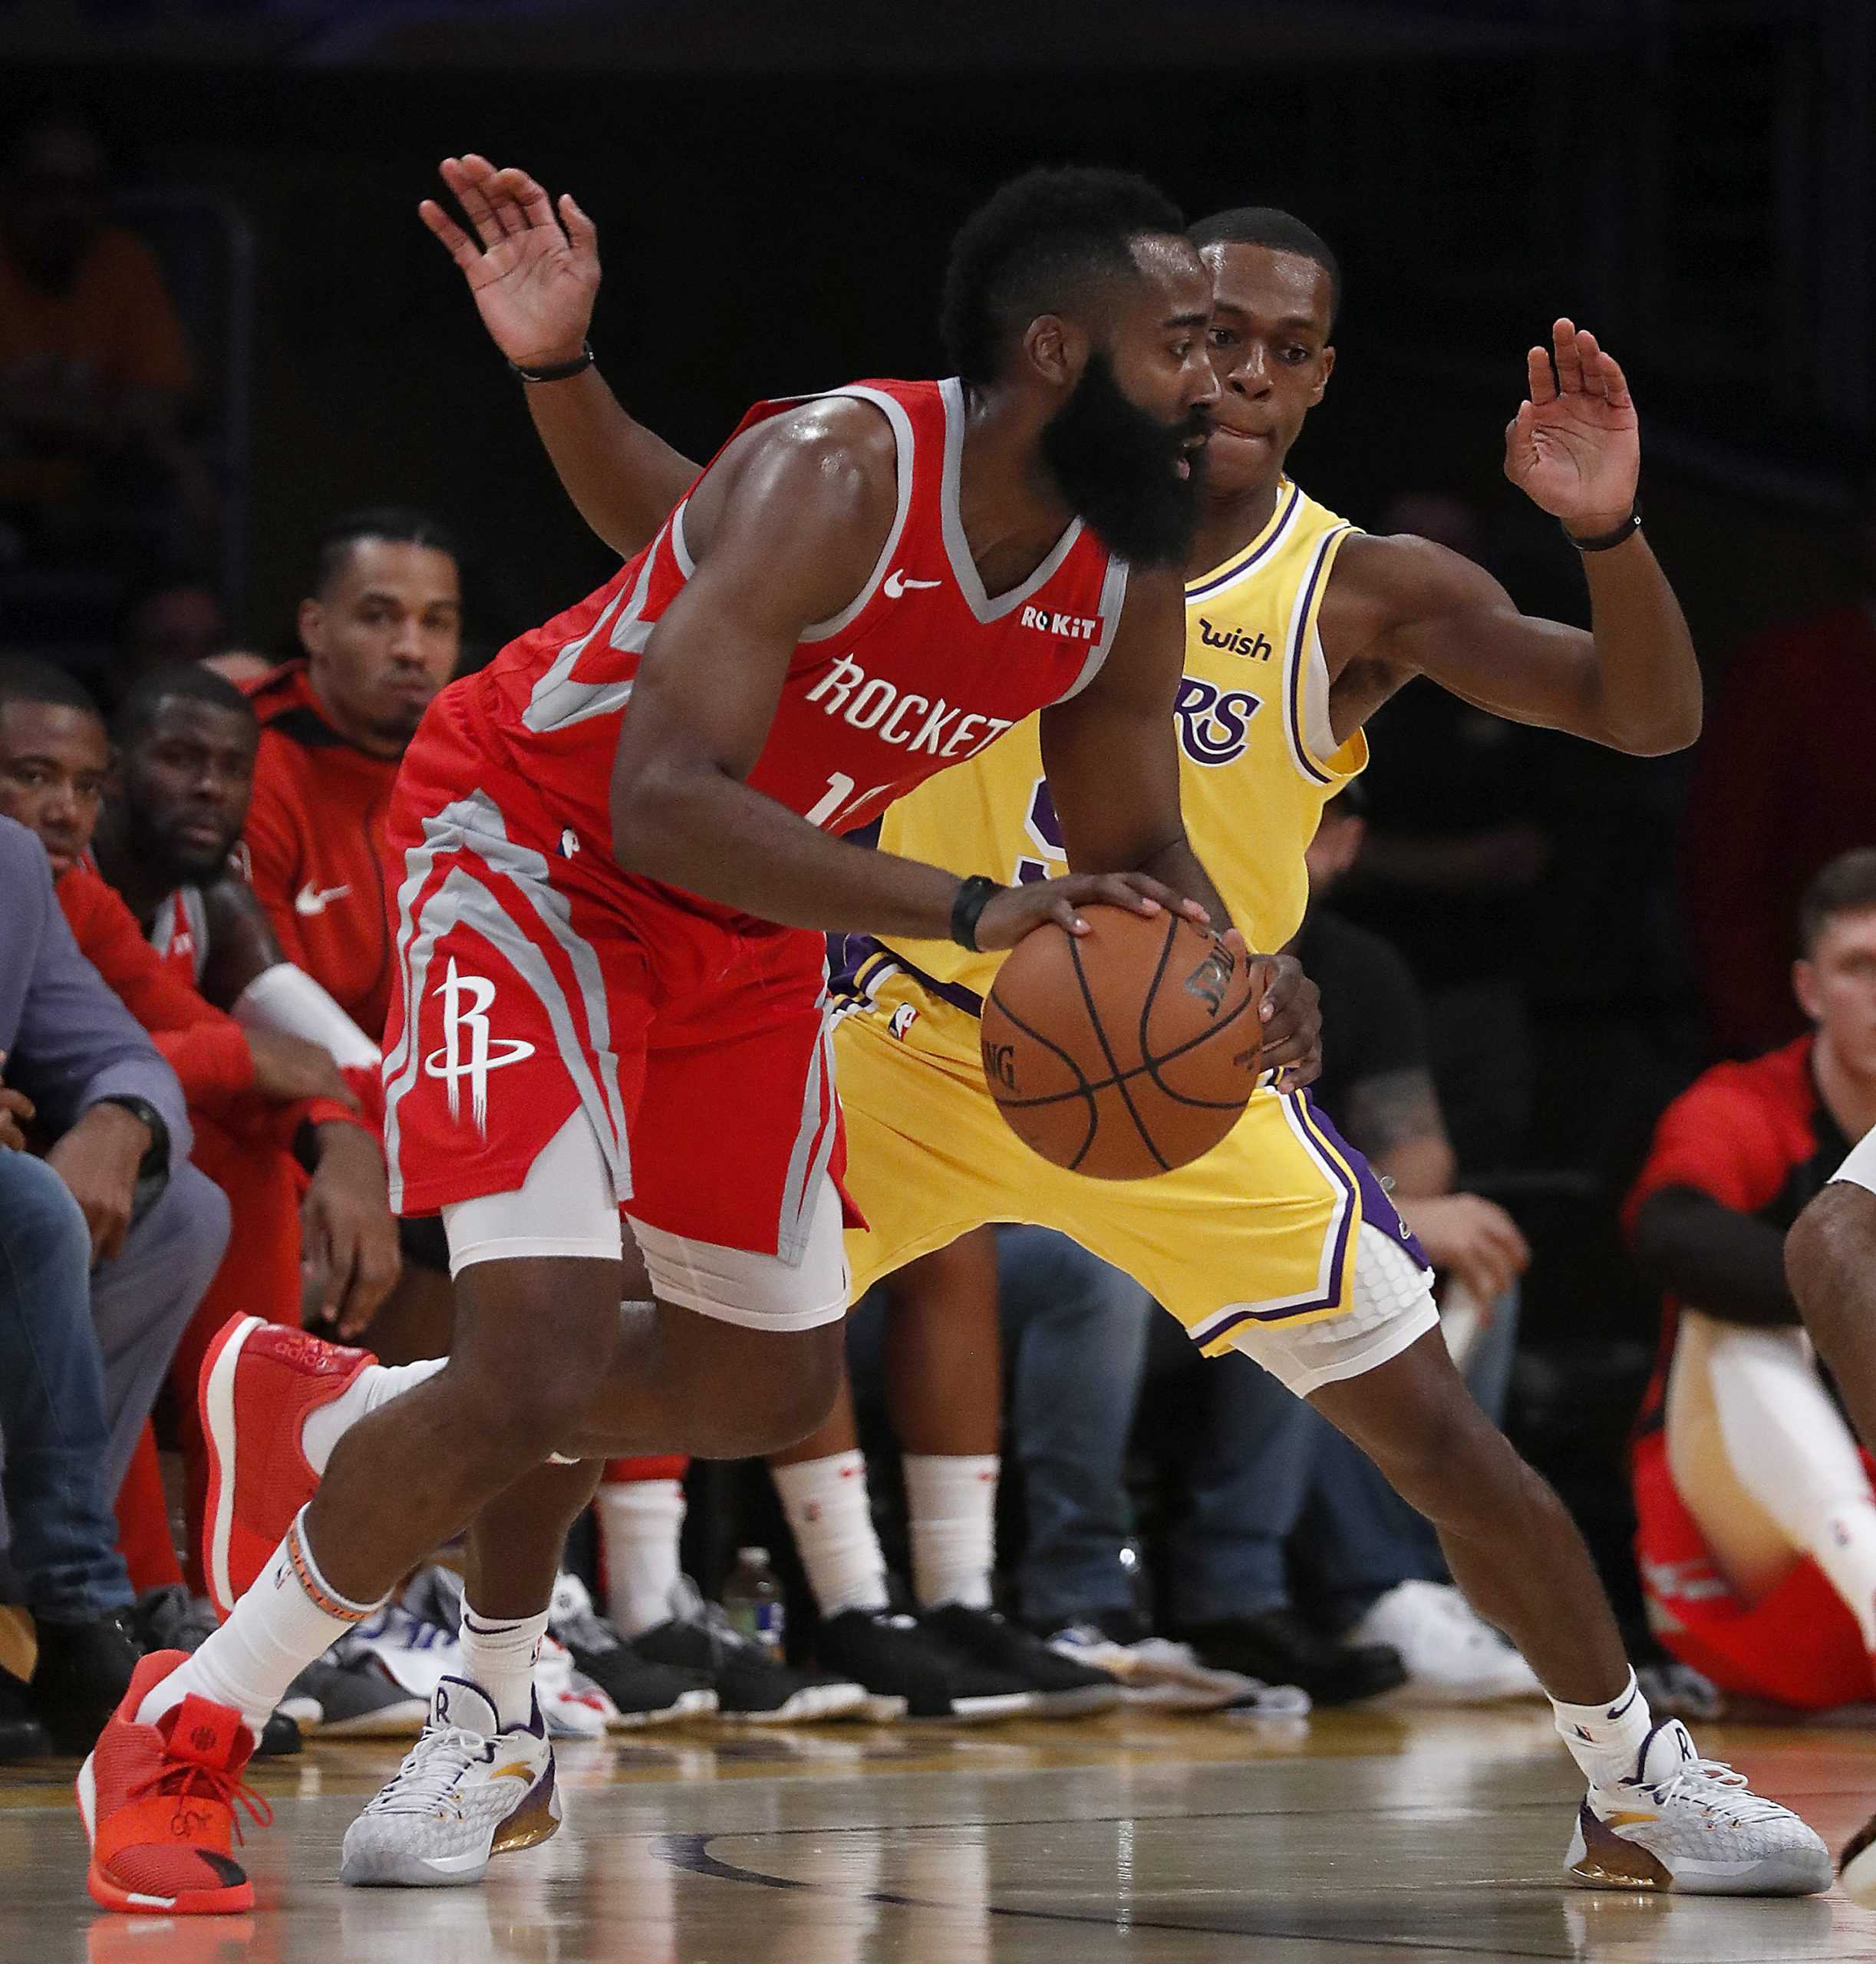 The Los Angeles Lakers Rajon Rondo defends against the Houson Rockets James Harden in the first quarter on Saturday, Oct. 20, 2018, at Staples Center in Los Angeles. (Luis Sinco/Los Angeles Times/TNS)